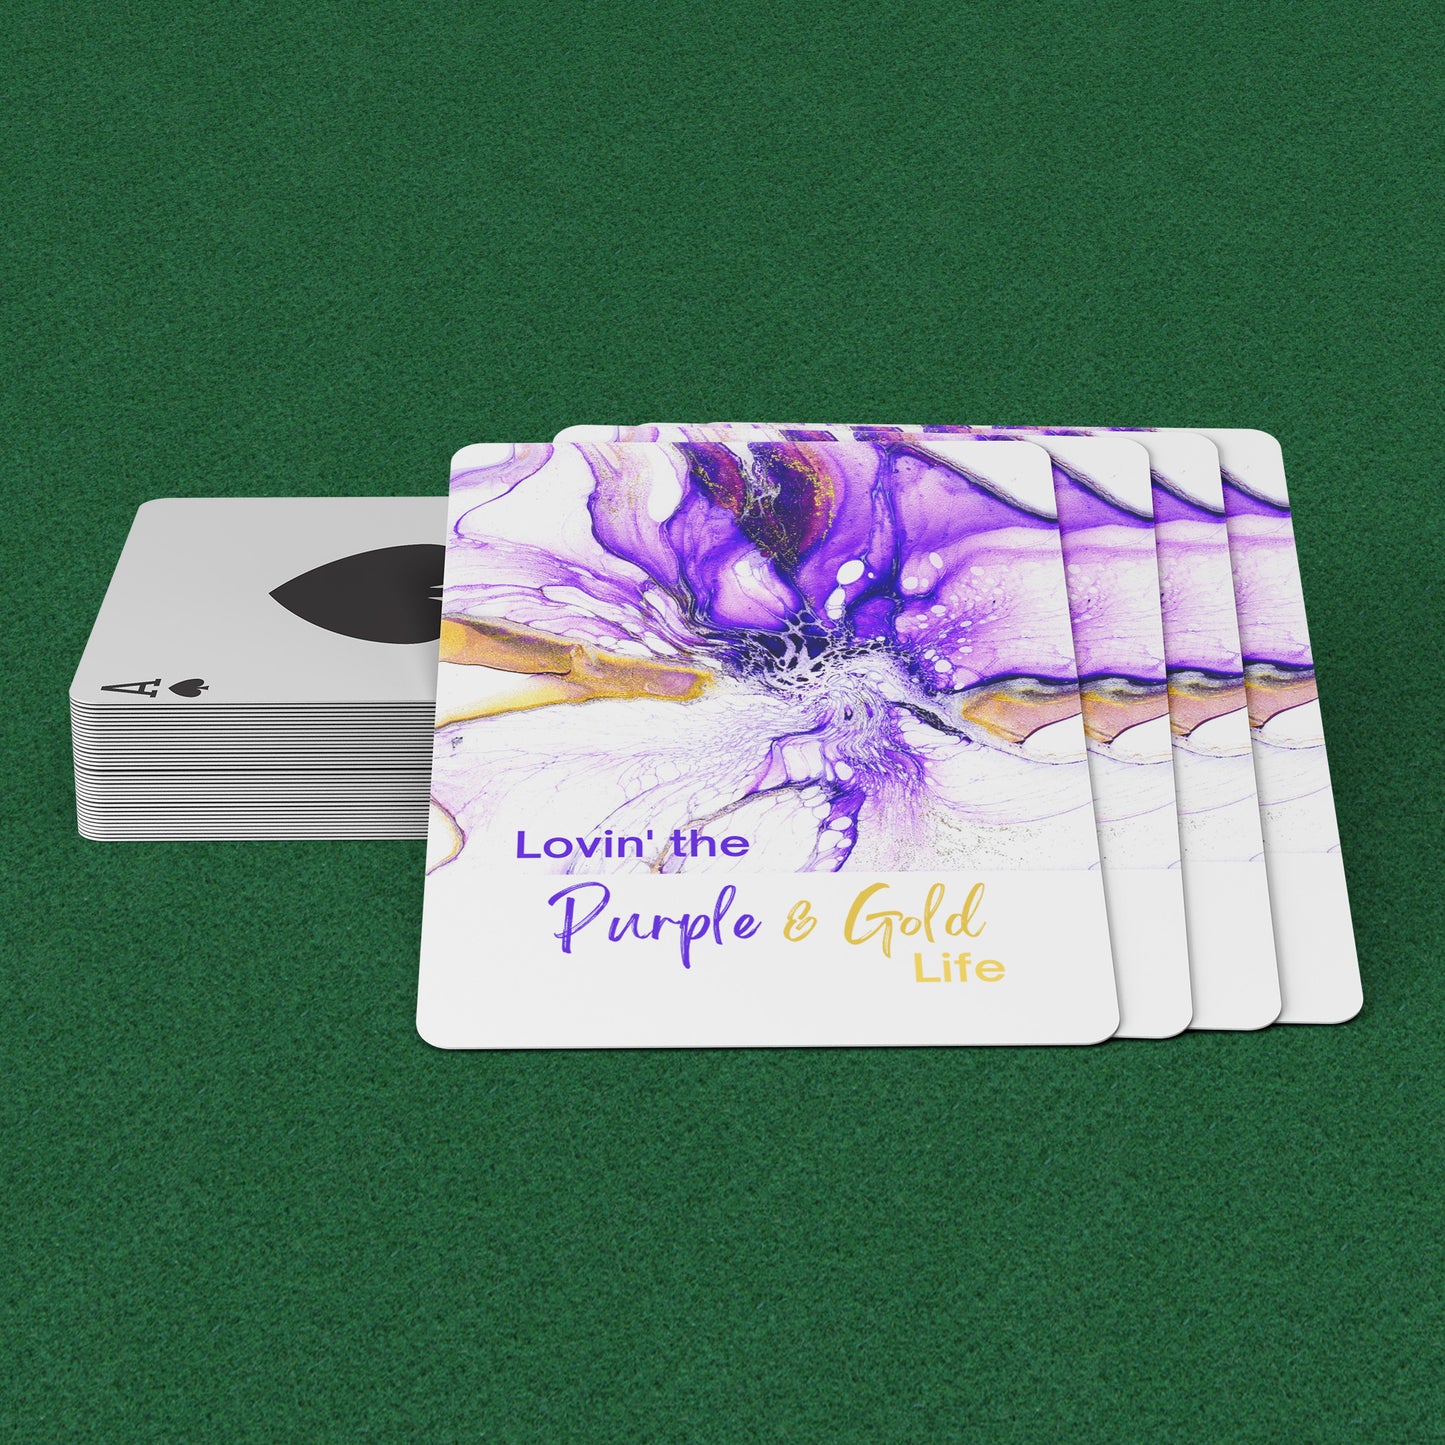 Purple & Gold Playing Cards • Personalized Purple & Gold Playing Cards • Custom Playing Cards